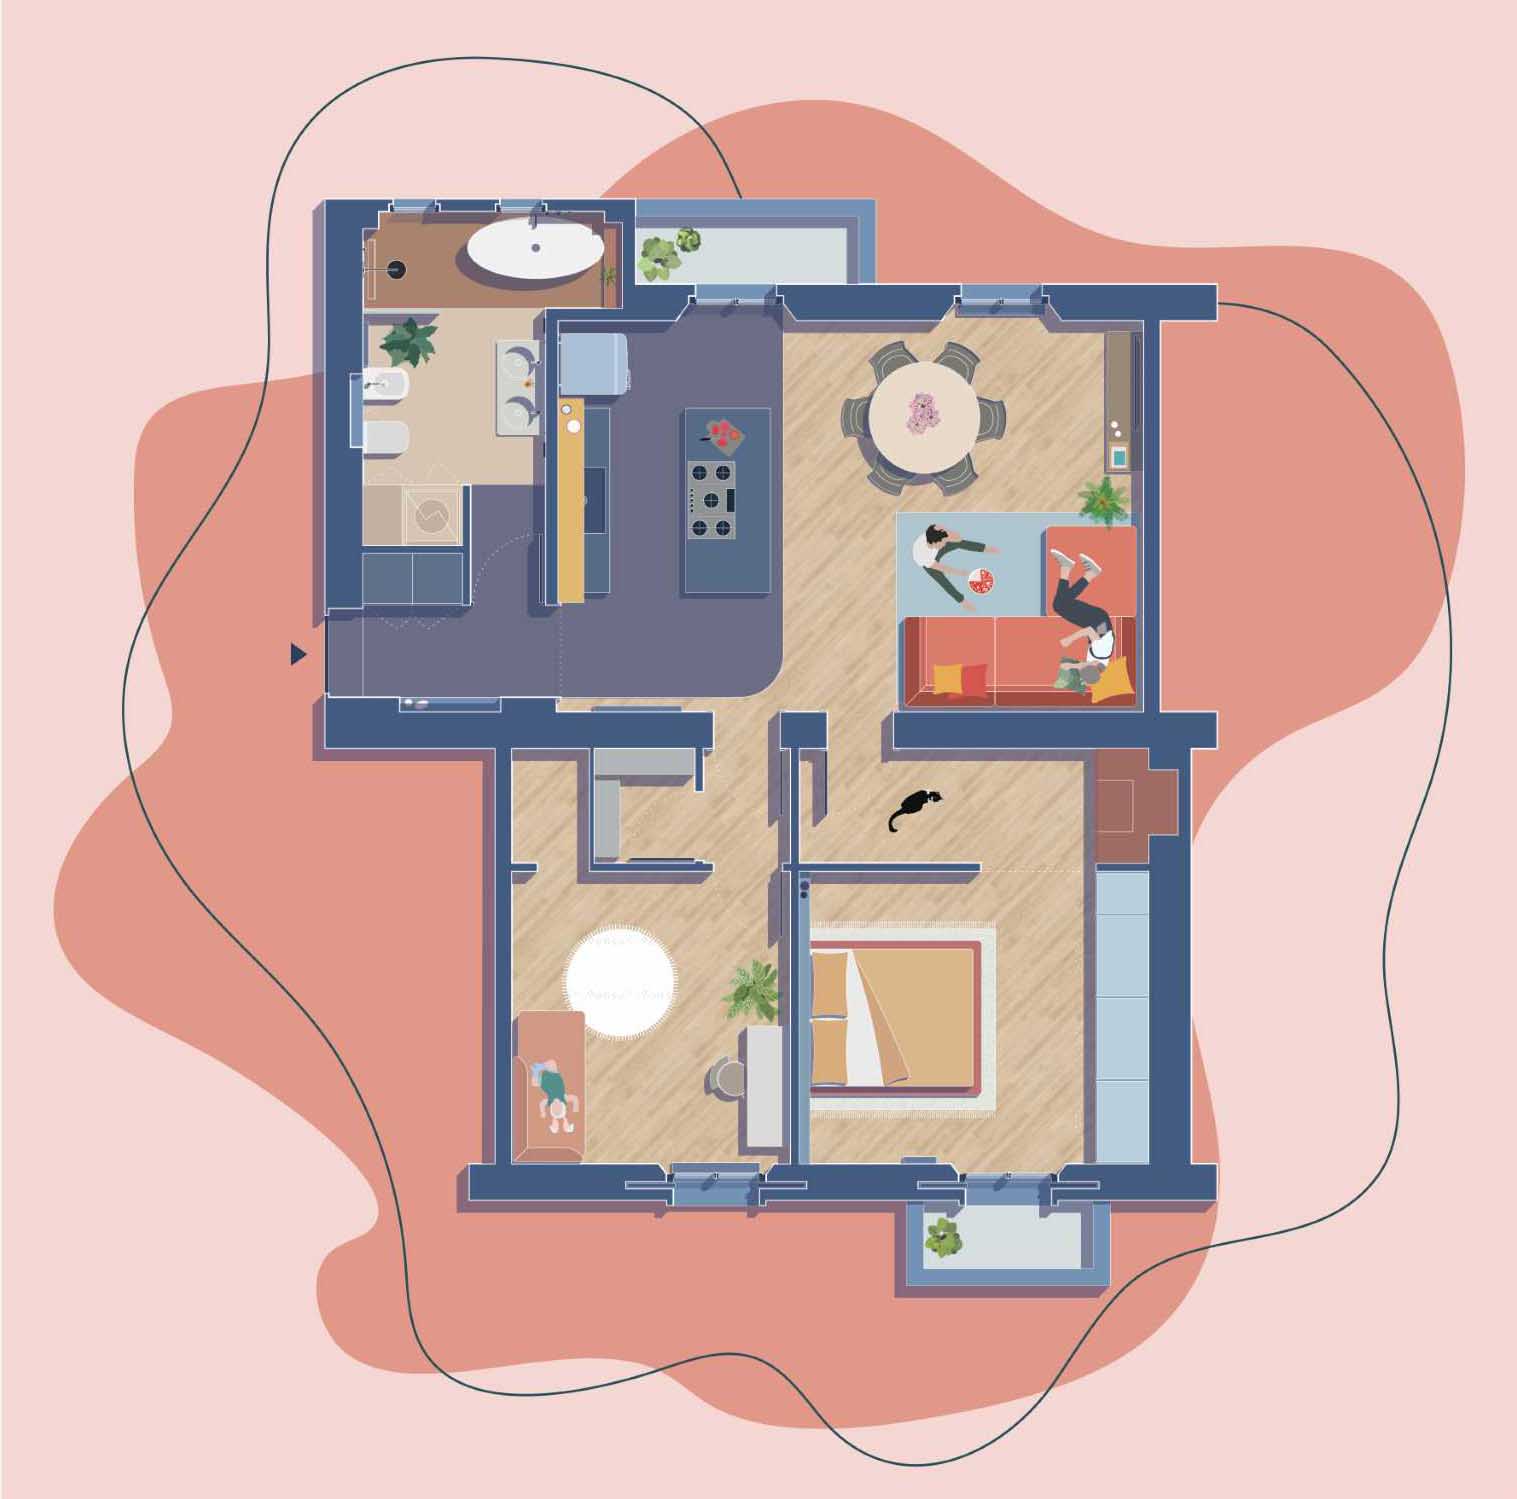 The floor plan of an apartment.